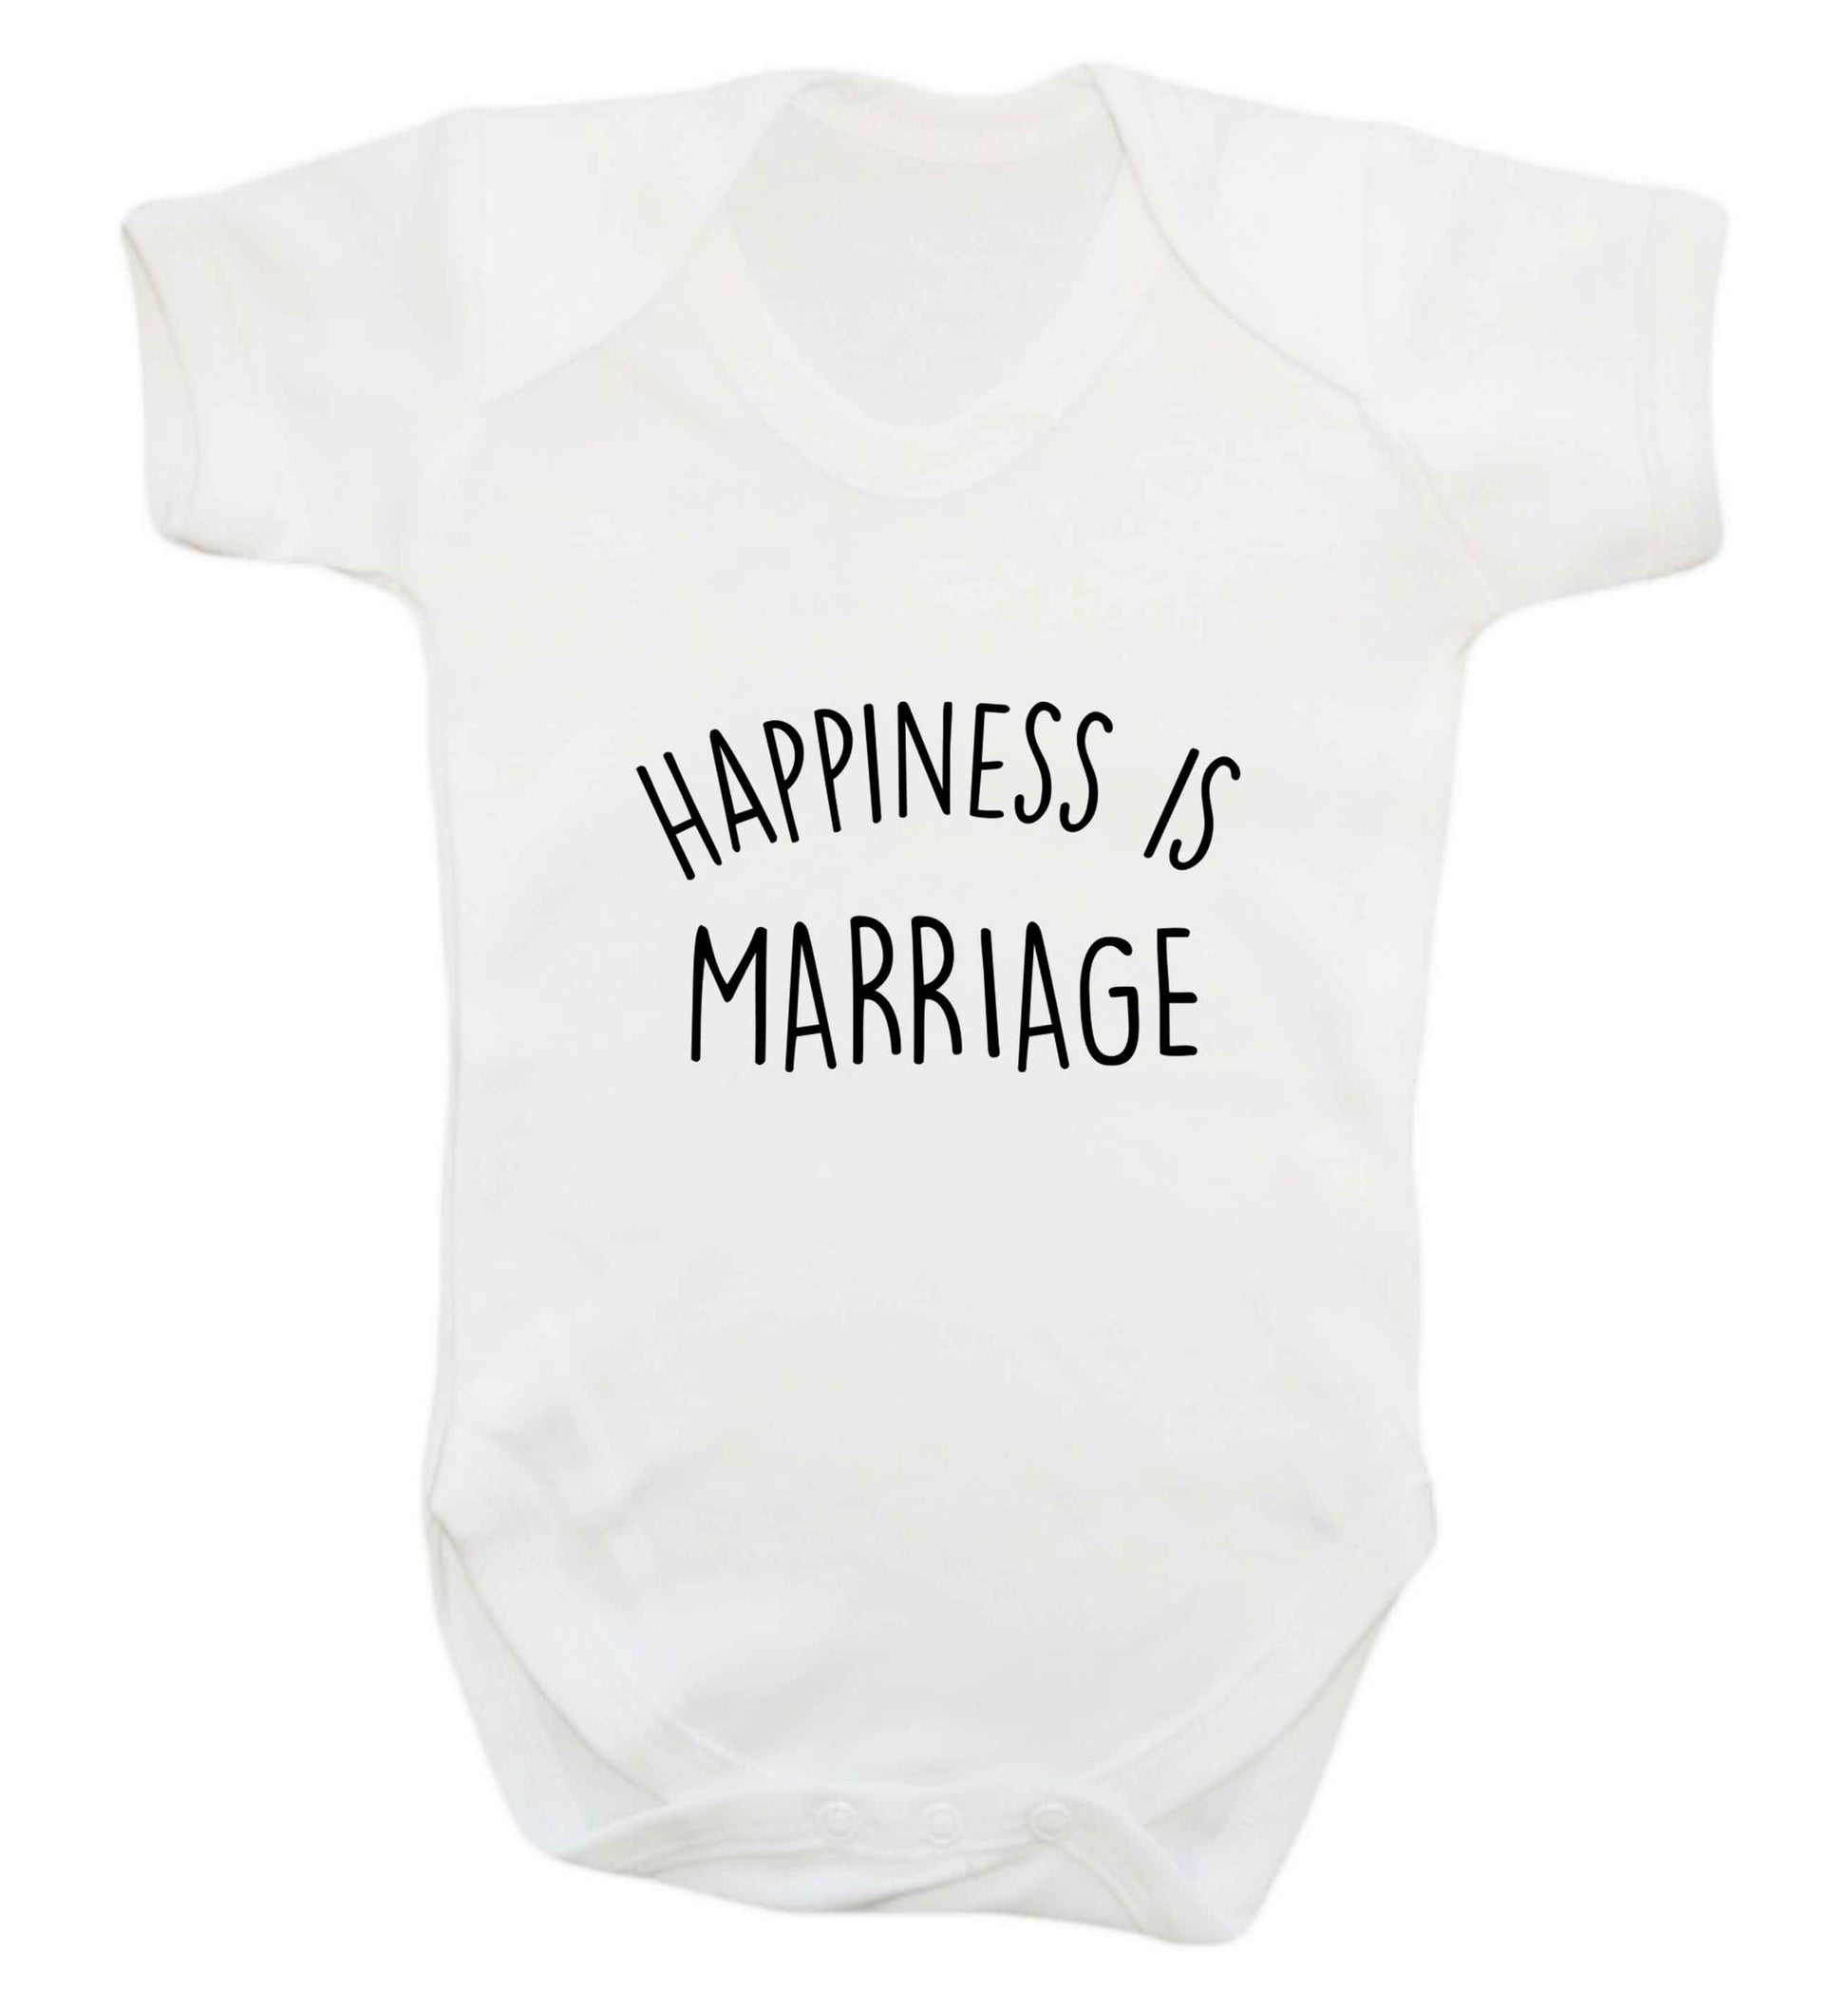 Happiness is wedding planning baby vest white 18-24 months